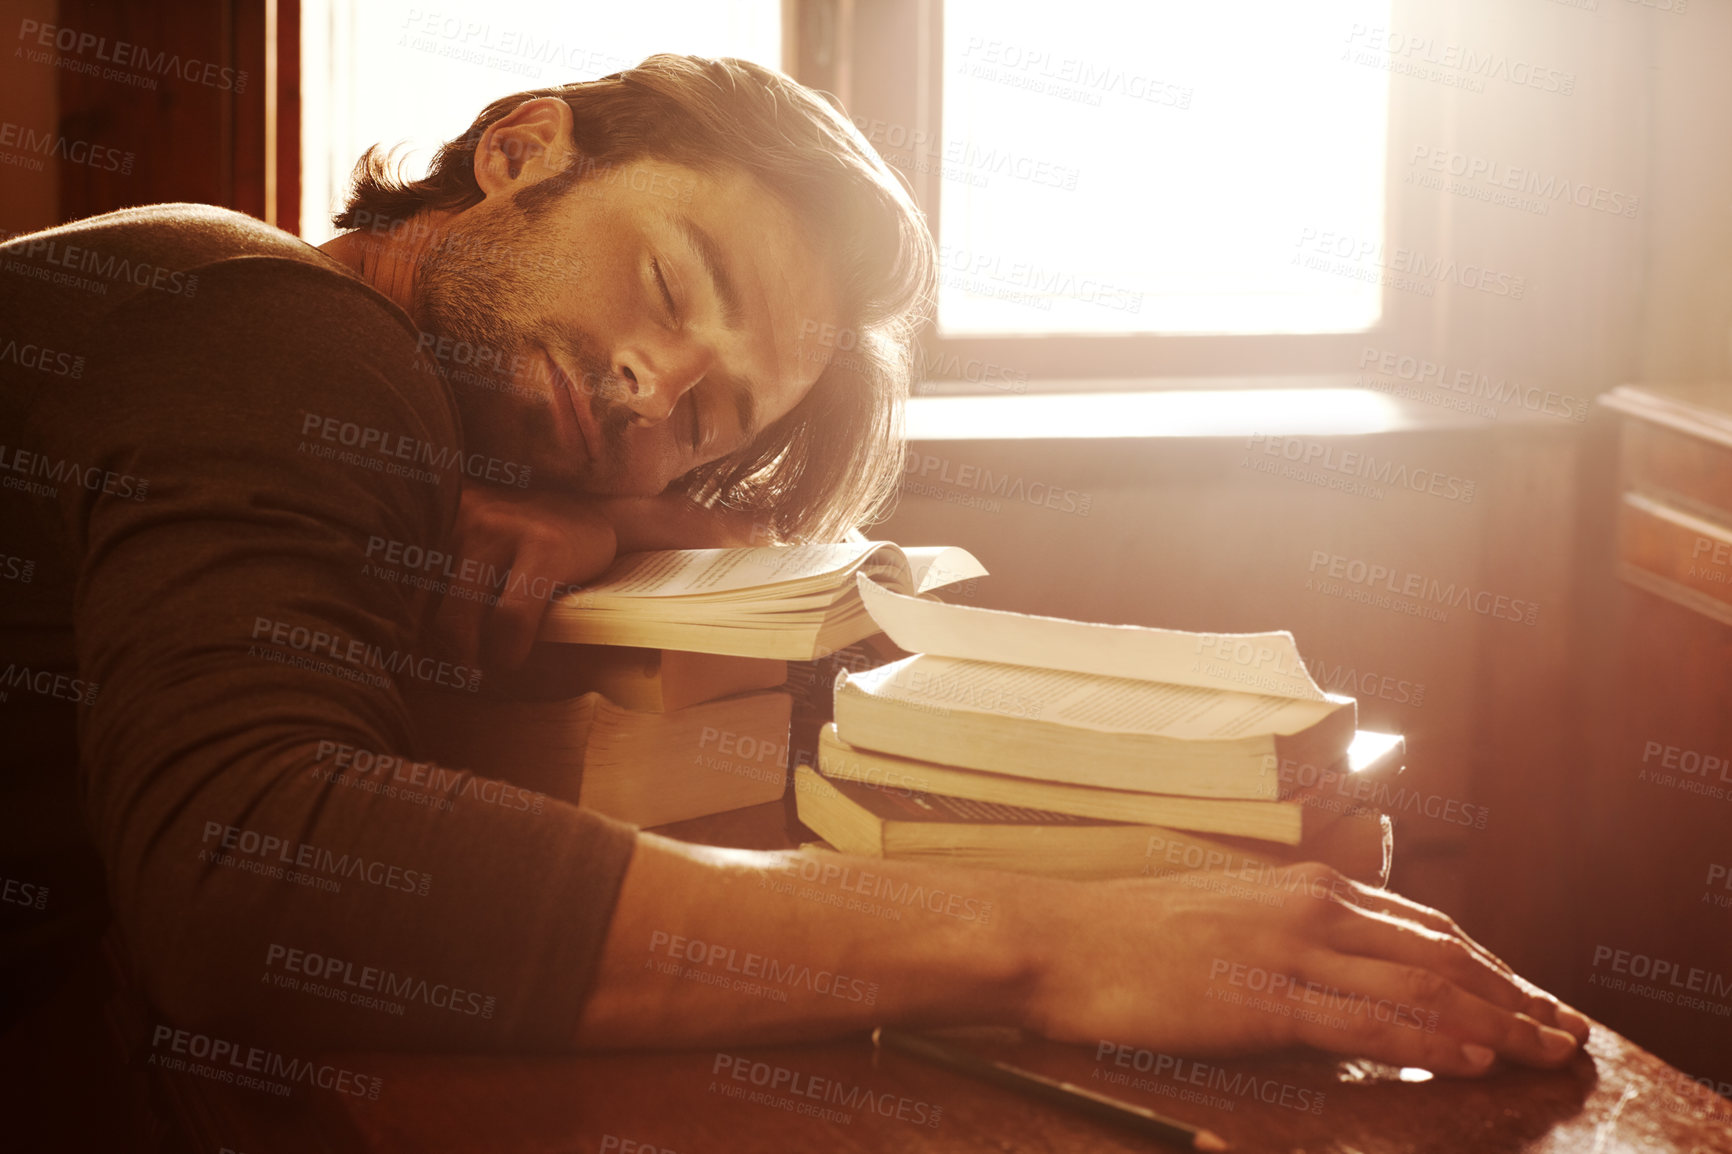 Sleeping, tired and man with books, student and fatigue with education, university and burnout. Person, academic and guy with literature, novel and exhausted with lens flare, insomnia and dreaming